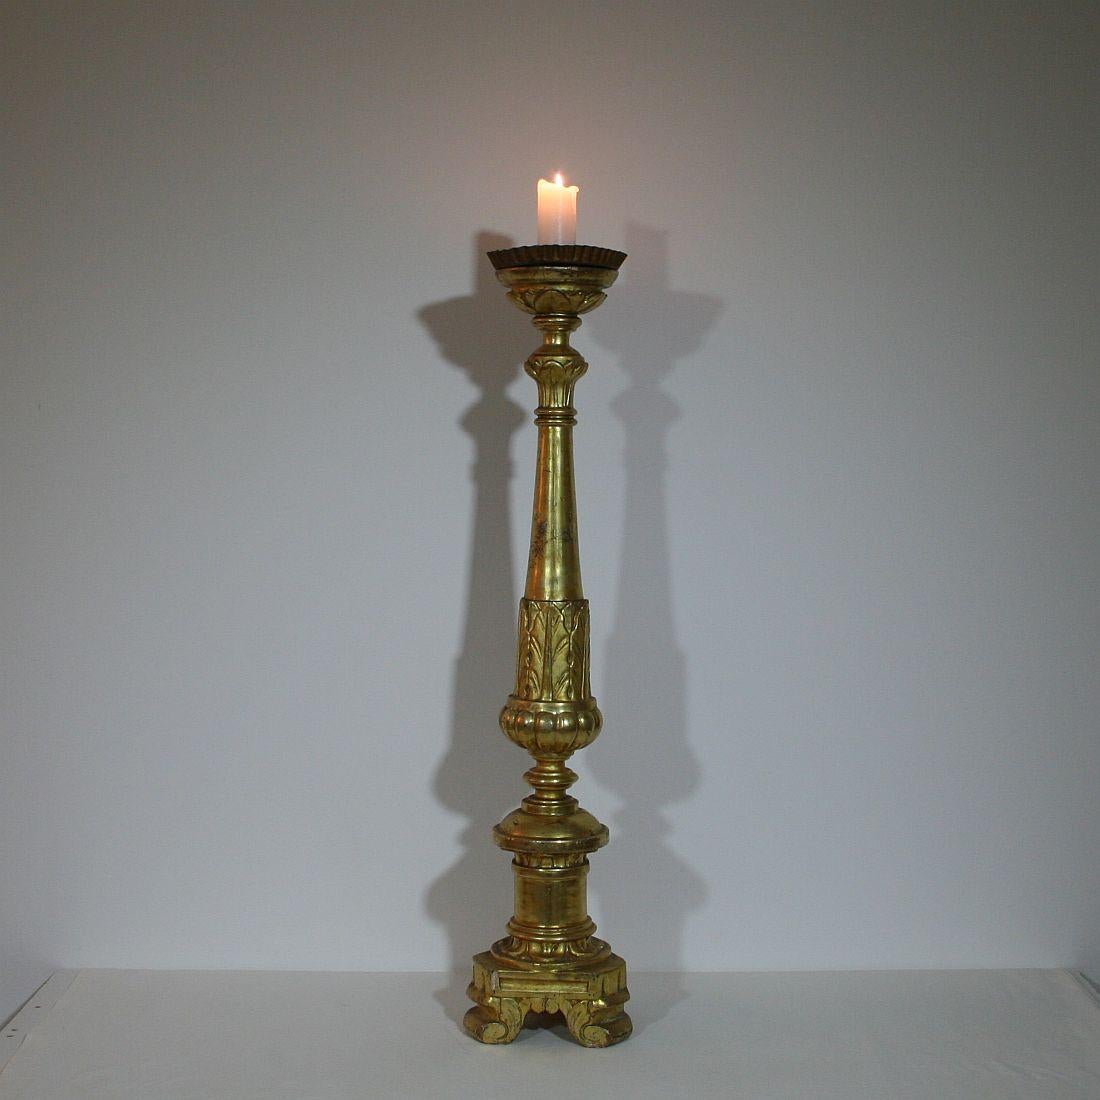 This giltwood Italian candlestick was originally used on the altar of a church. It was hand-carved and exquisitely gilded on only one side as a means of economy for the Church. Great piece.